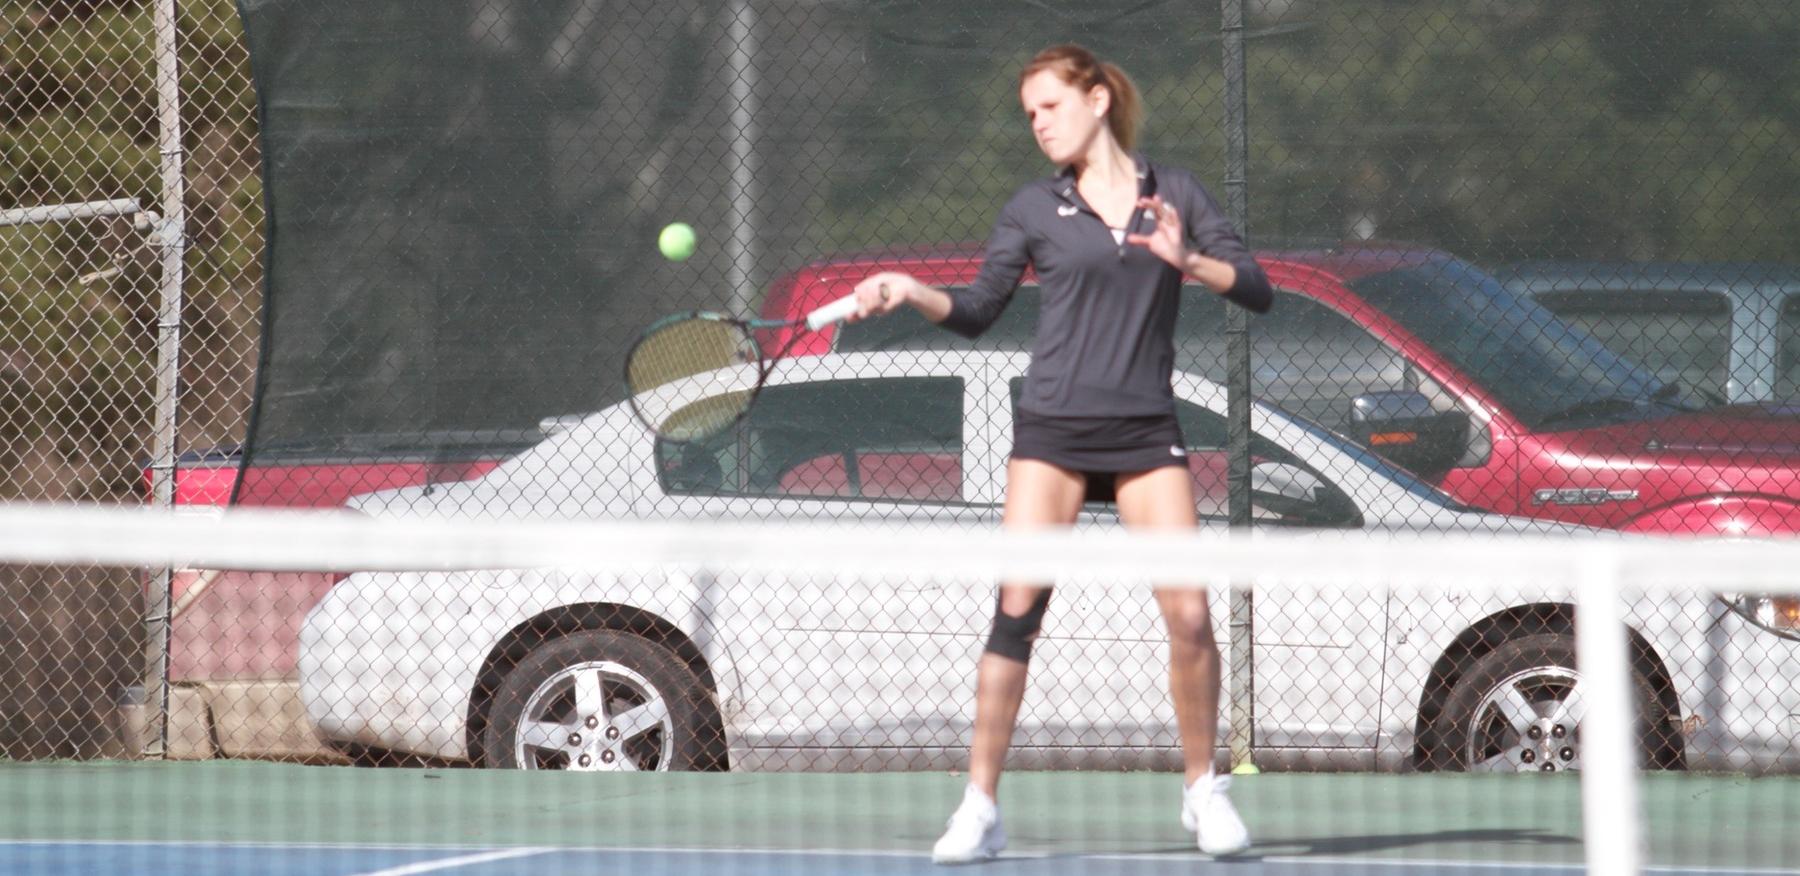 Co-Lin's women's tennis team moves to 1-0